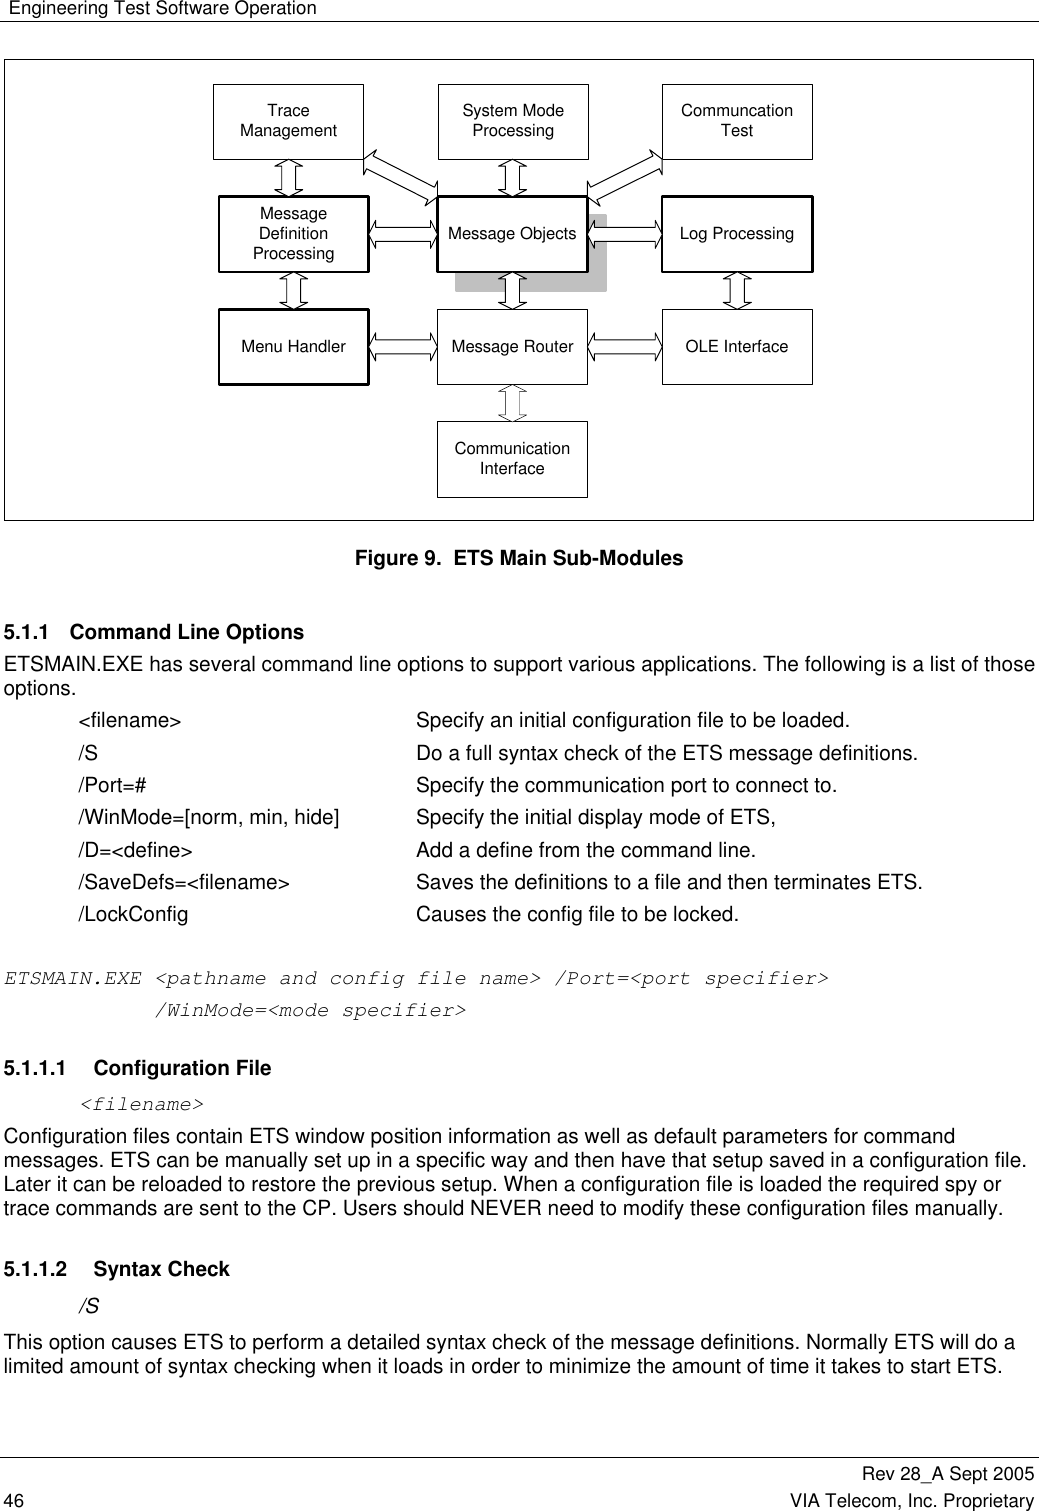  Engineering Test Software Operation   Rev 28_A Sept 2005 46  VIA Telecom, Inc. Proprietary  TraceManagementCommunicationInterfaceMenu HandlerMessageDefinitionProcessingSystem ModeProcessingMessage RouterLog ProcessingOLE InterfaceMessage ObjectsCommuncationTest Figure 9.  ETS Main Sub-Modules 5.1.1  Command Line Options ETSMAIN.EXE has several command line options to support various applications. The following is a list of those options.  &lt;filename&gt;  Specify an initial configuration file to be loaded. /S  Do a full syntax check of the ETS message definitions. /Port=#  Specify the communication port to connect to. /WinMode=[norm, min, hide]  Specify the initial display mode of ETS, /D=&lt;define&gt;  Add a define from the command line. /SaveDefs=&lt;filename&gt;  Saves the definitions to a file and then terminates ETS. /LockConfig  Causes the config file to be locked.  ETSMAIN.EXE &lt;pathname and config file name&gt; /Port=&lt;port specifier&gt;             /WinMode=&lt;mode specifier&gt; 5.1.1.1  Configuration File &lt;filename&gt; Configuration files contain ETS window position information as well as default parameters for command messages. ETS can be manually set up in a specific way and then have that setup saved in a configuration file. Later it can be reloaded to restore the previous setup. When a configuration file is loaded the required spy or trace commands are sent to the CP. Users should NEVER need to modify these configuration files manually. 5.1.1.2  Syntax Check /S This option causes ETS to perform a detailed syntax check of the message definitions. Normally ETS will do a limited amount of syntax checking when it loads in order to minimize the amount of time it takes to start ETS. 